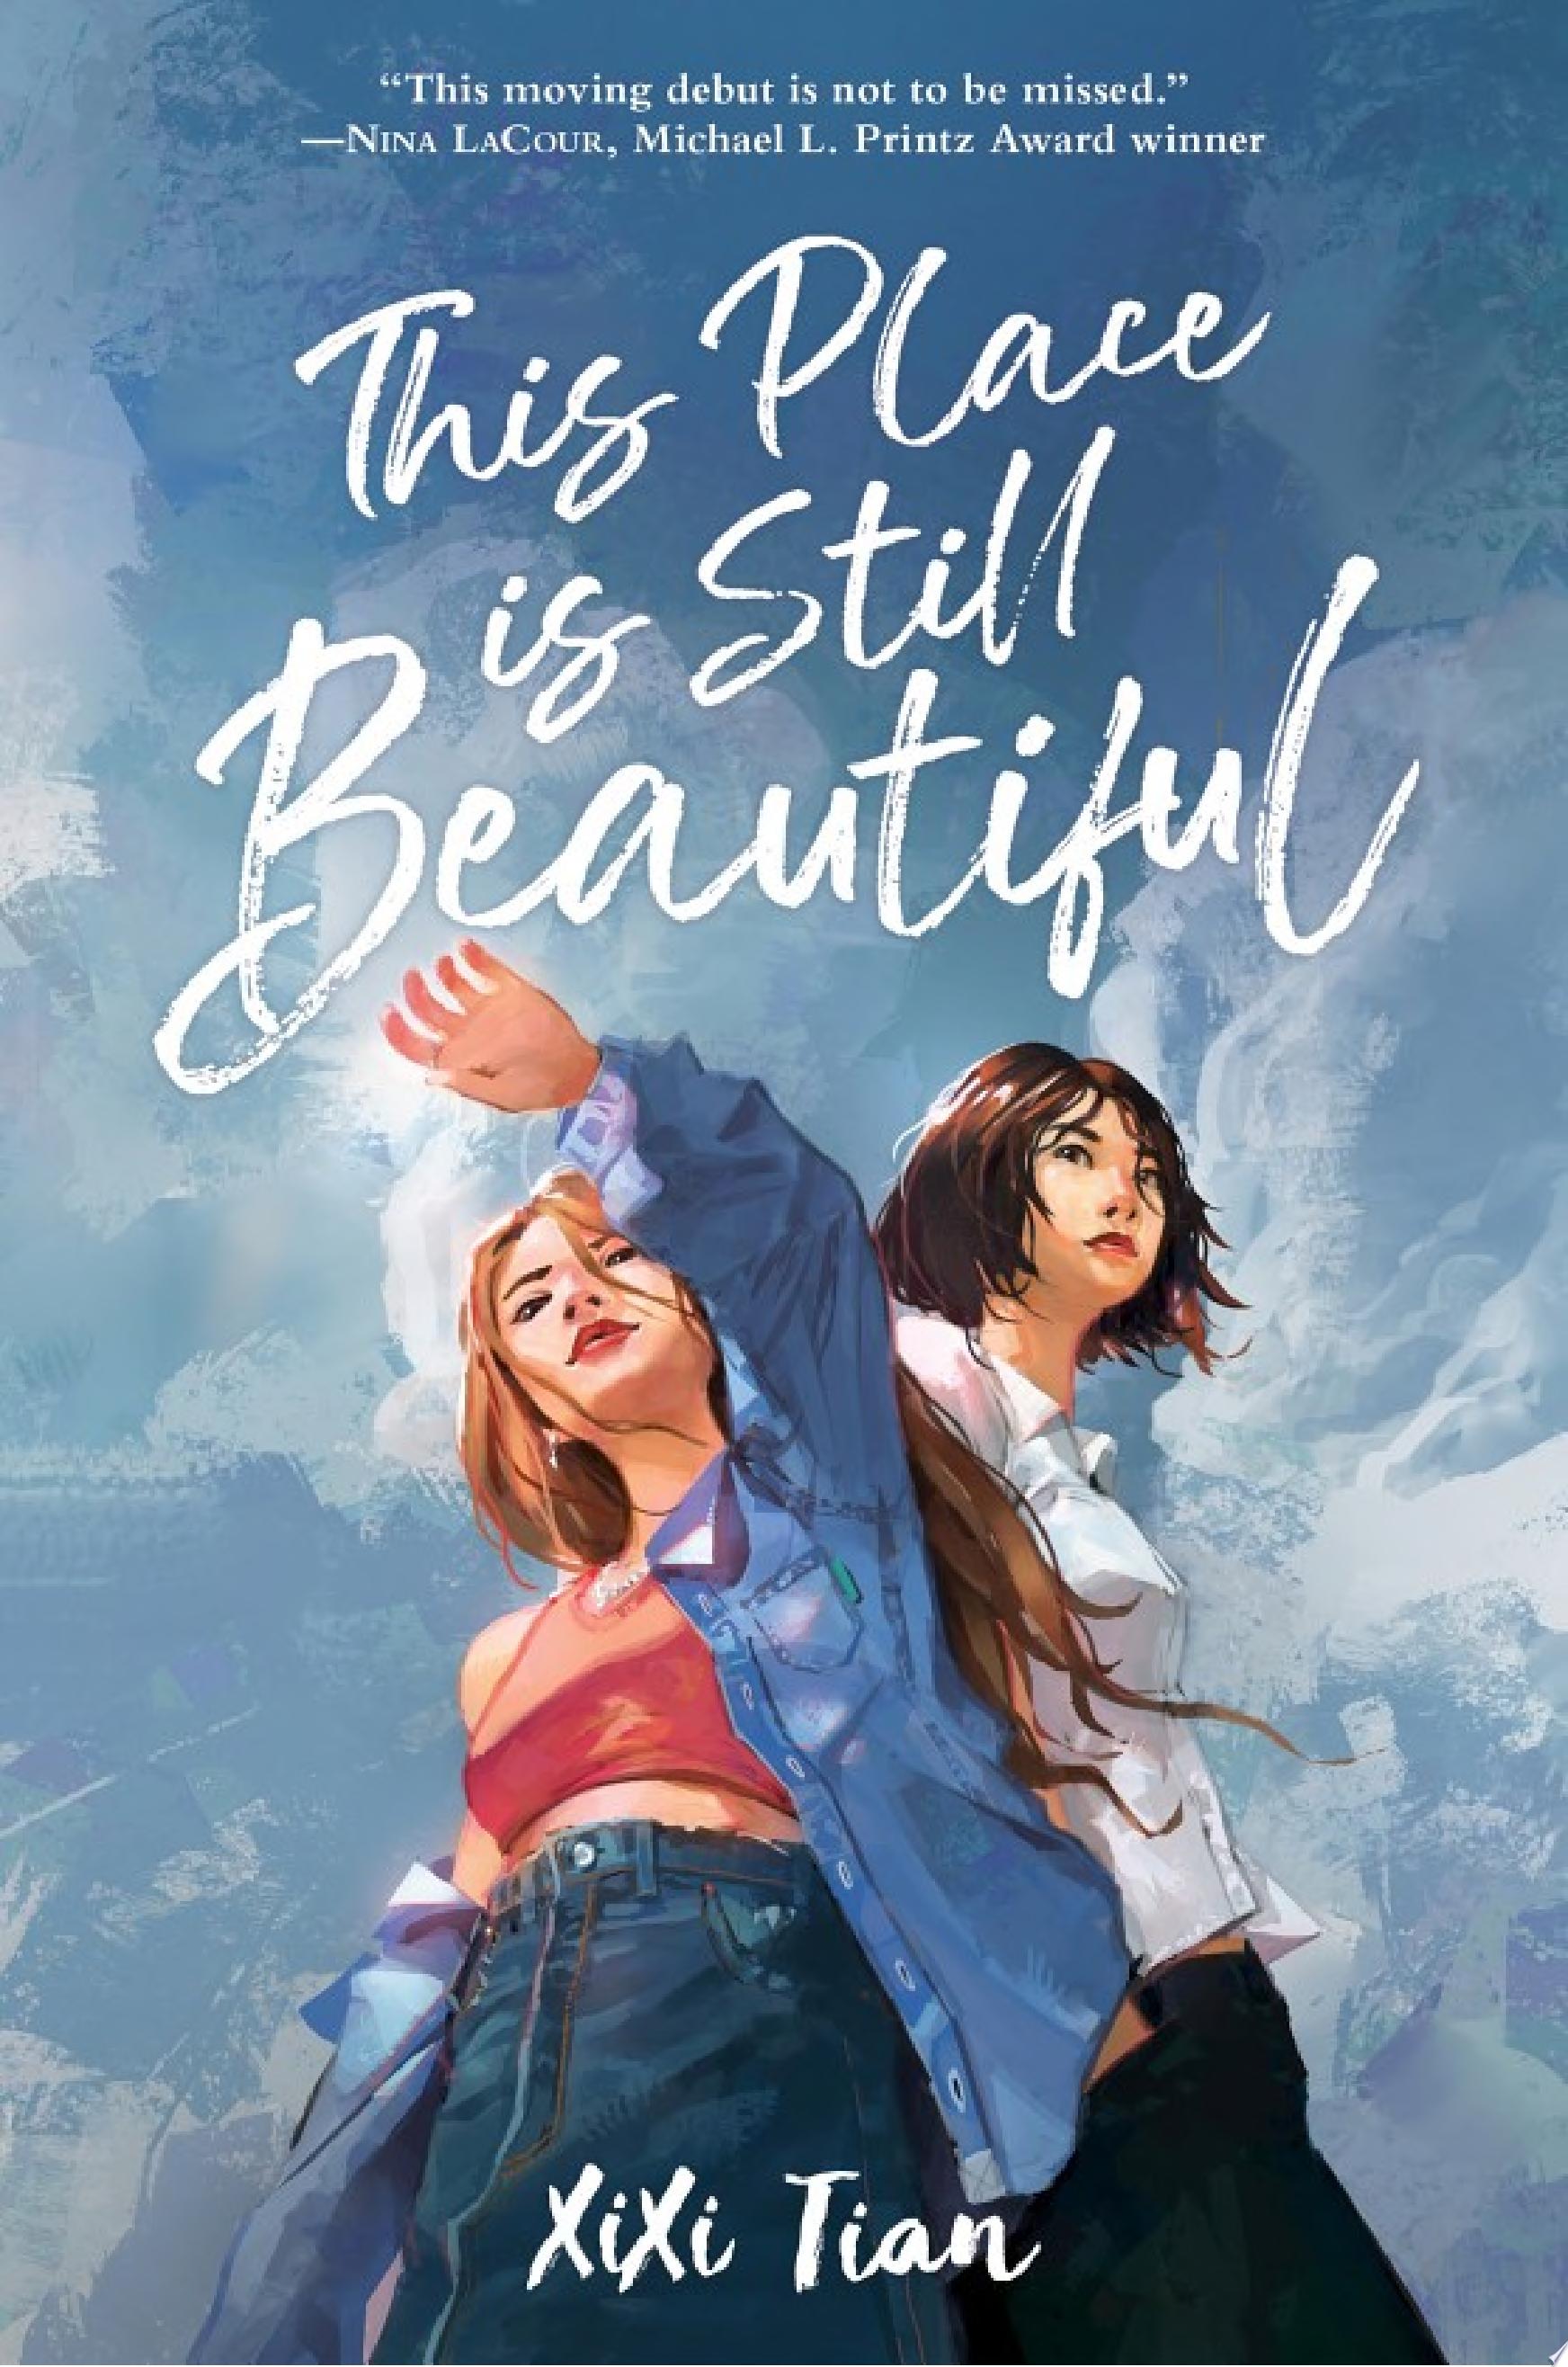 Image for "This Place Is Still Beautiful"